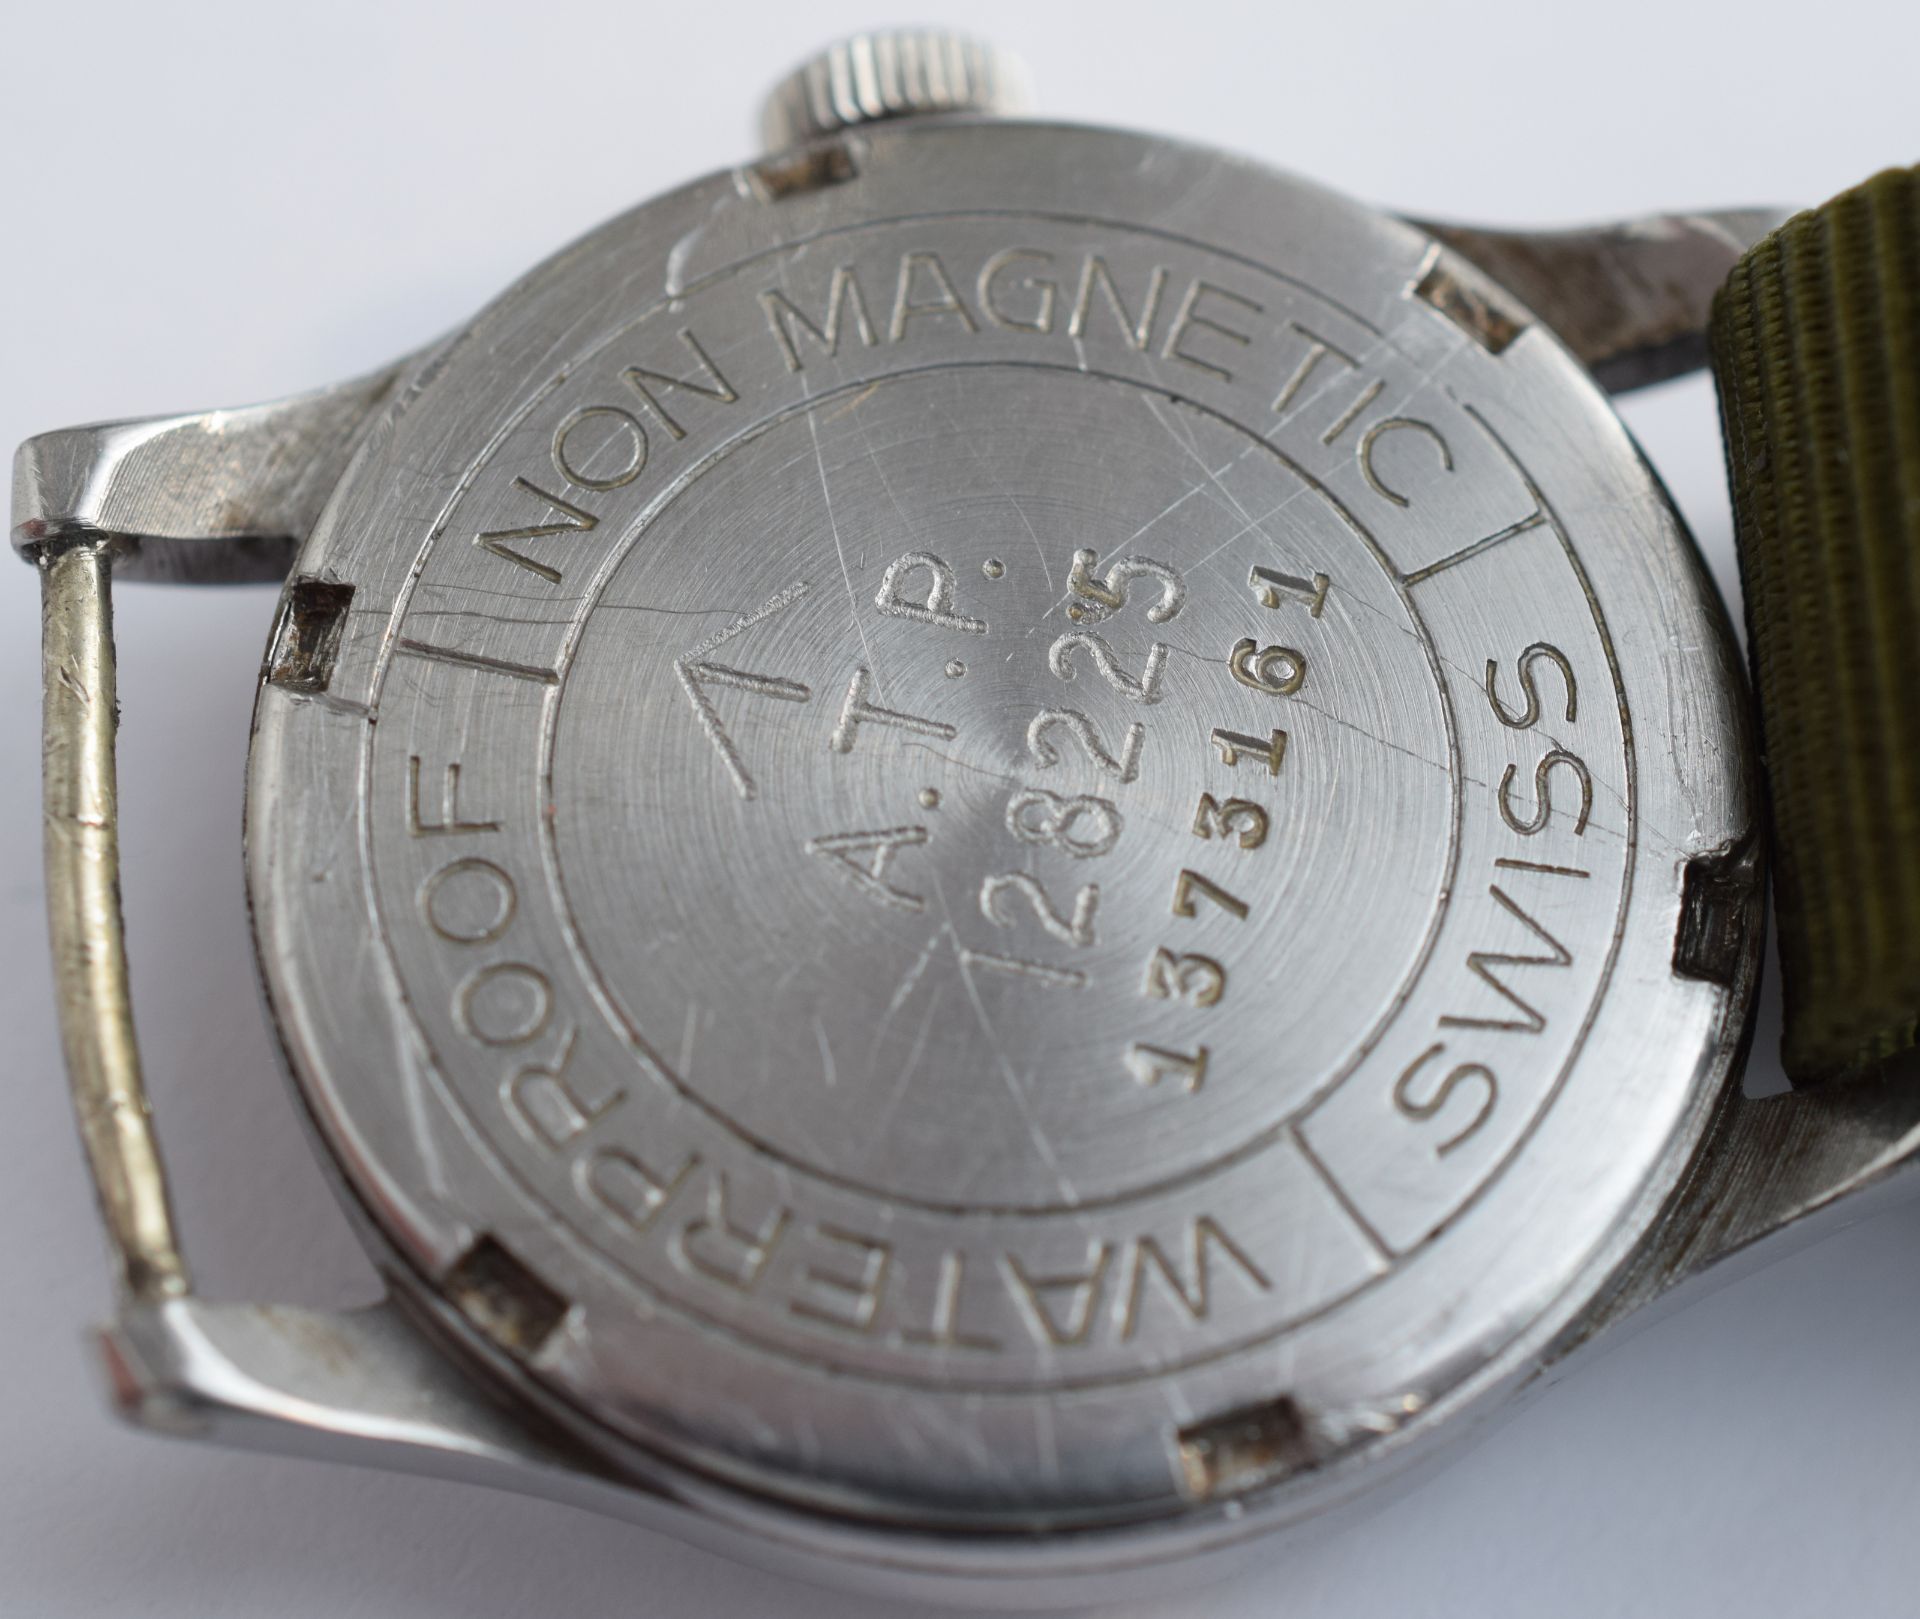 Vintage Military Wristwatch A.T.P. C1938 - Image 7 of 7